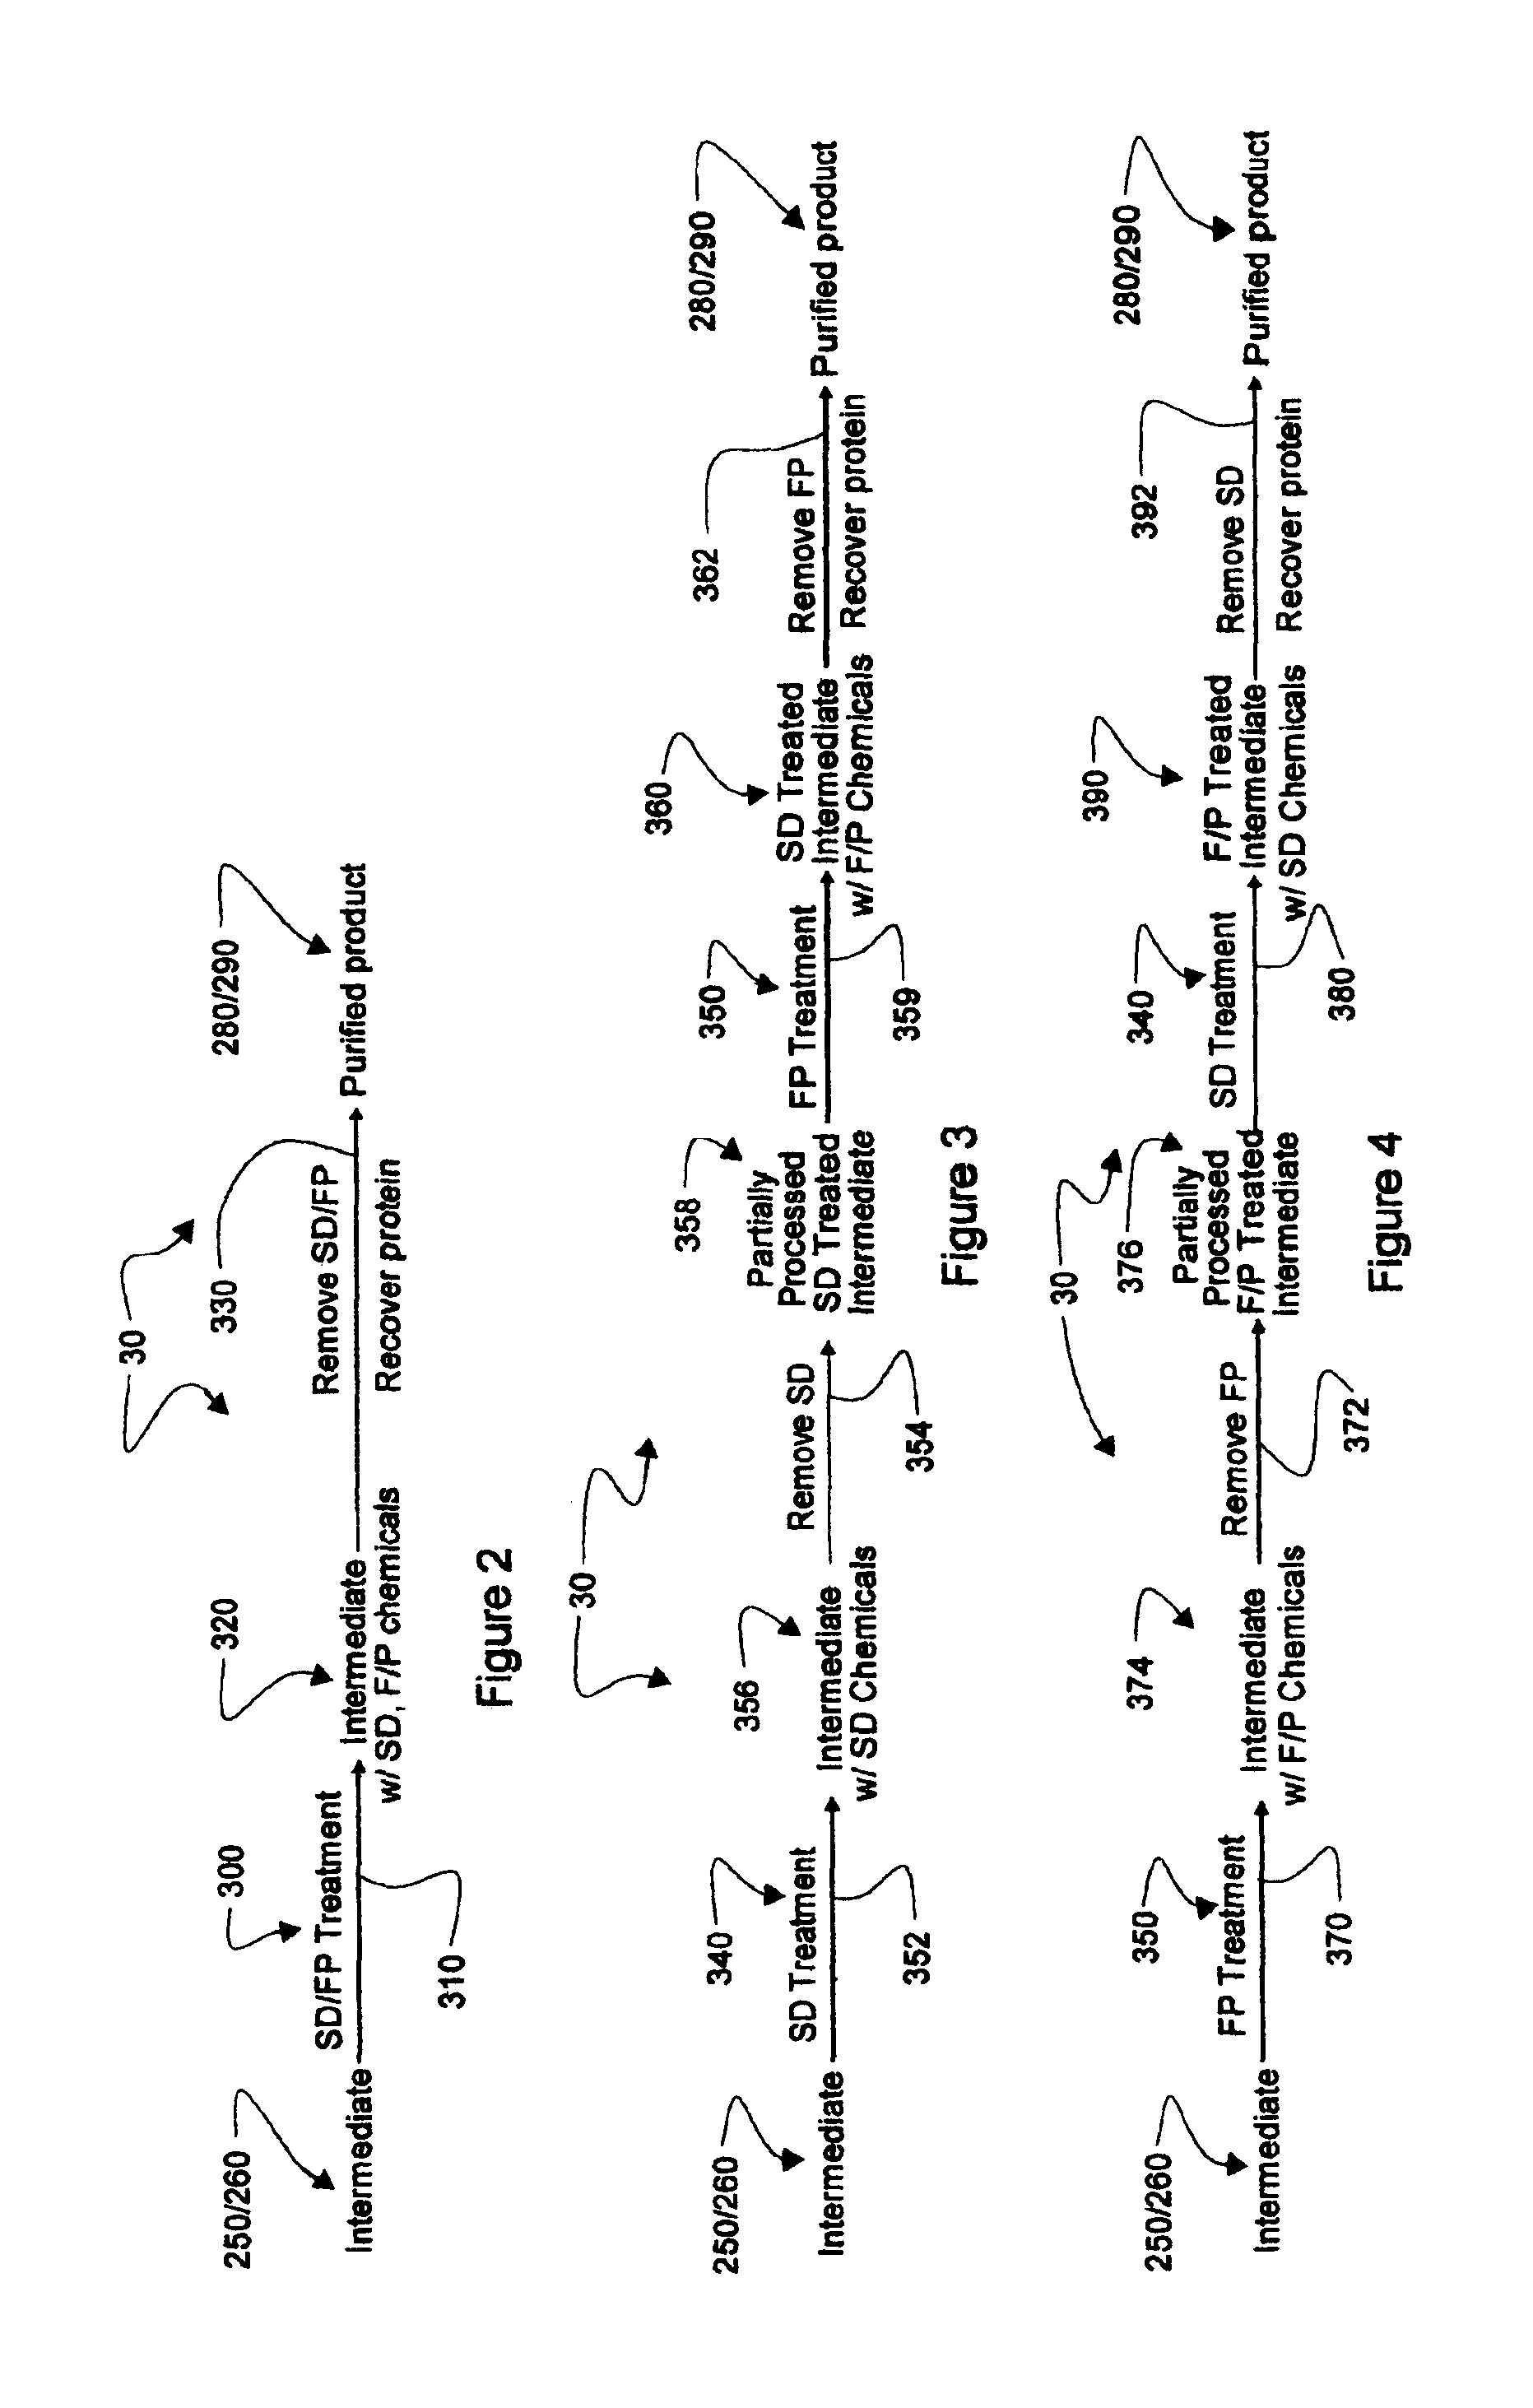 Augmented solvent/detergent method for inactivating enveloped and non-enveloped viruses